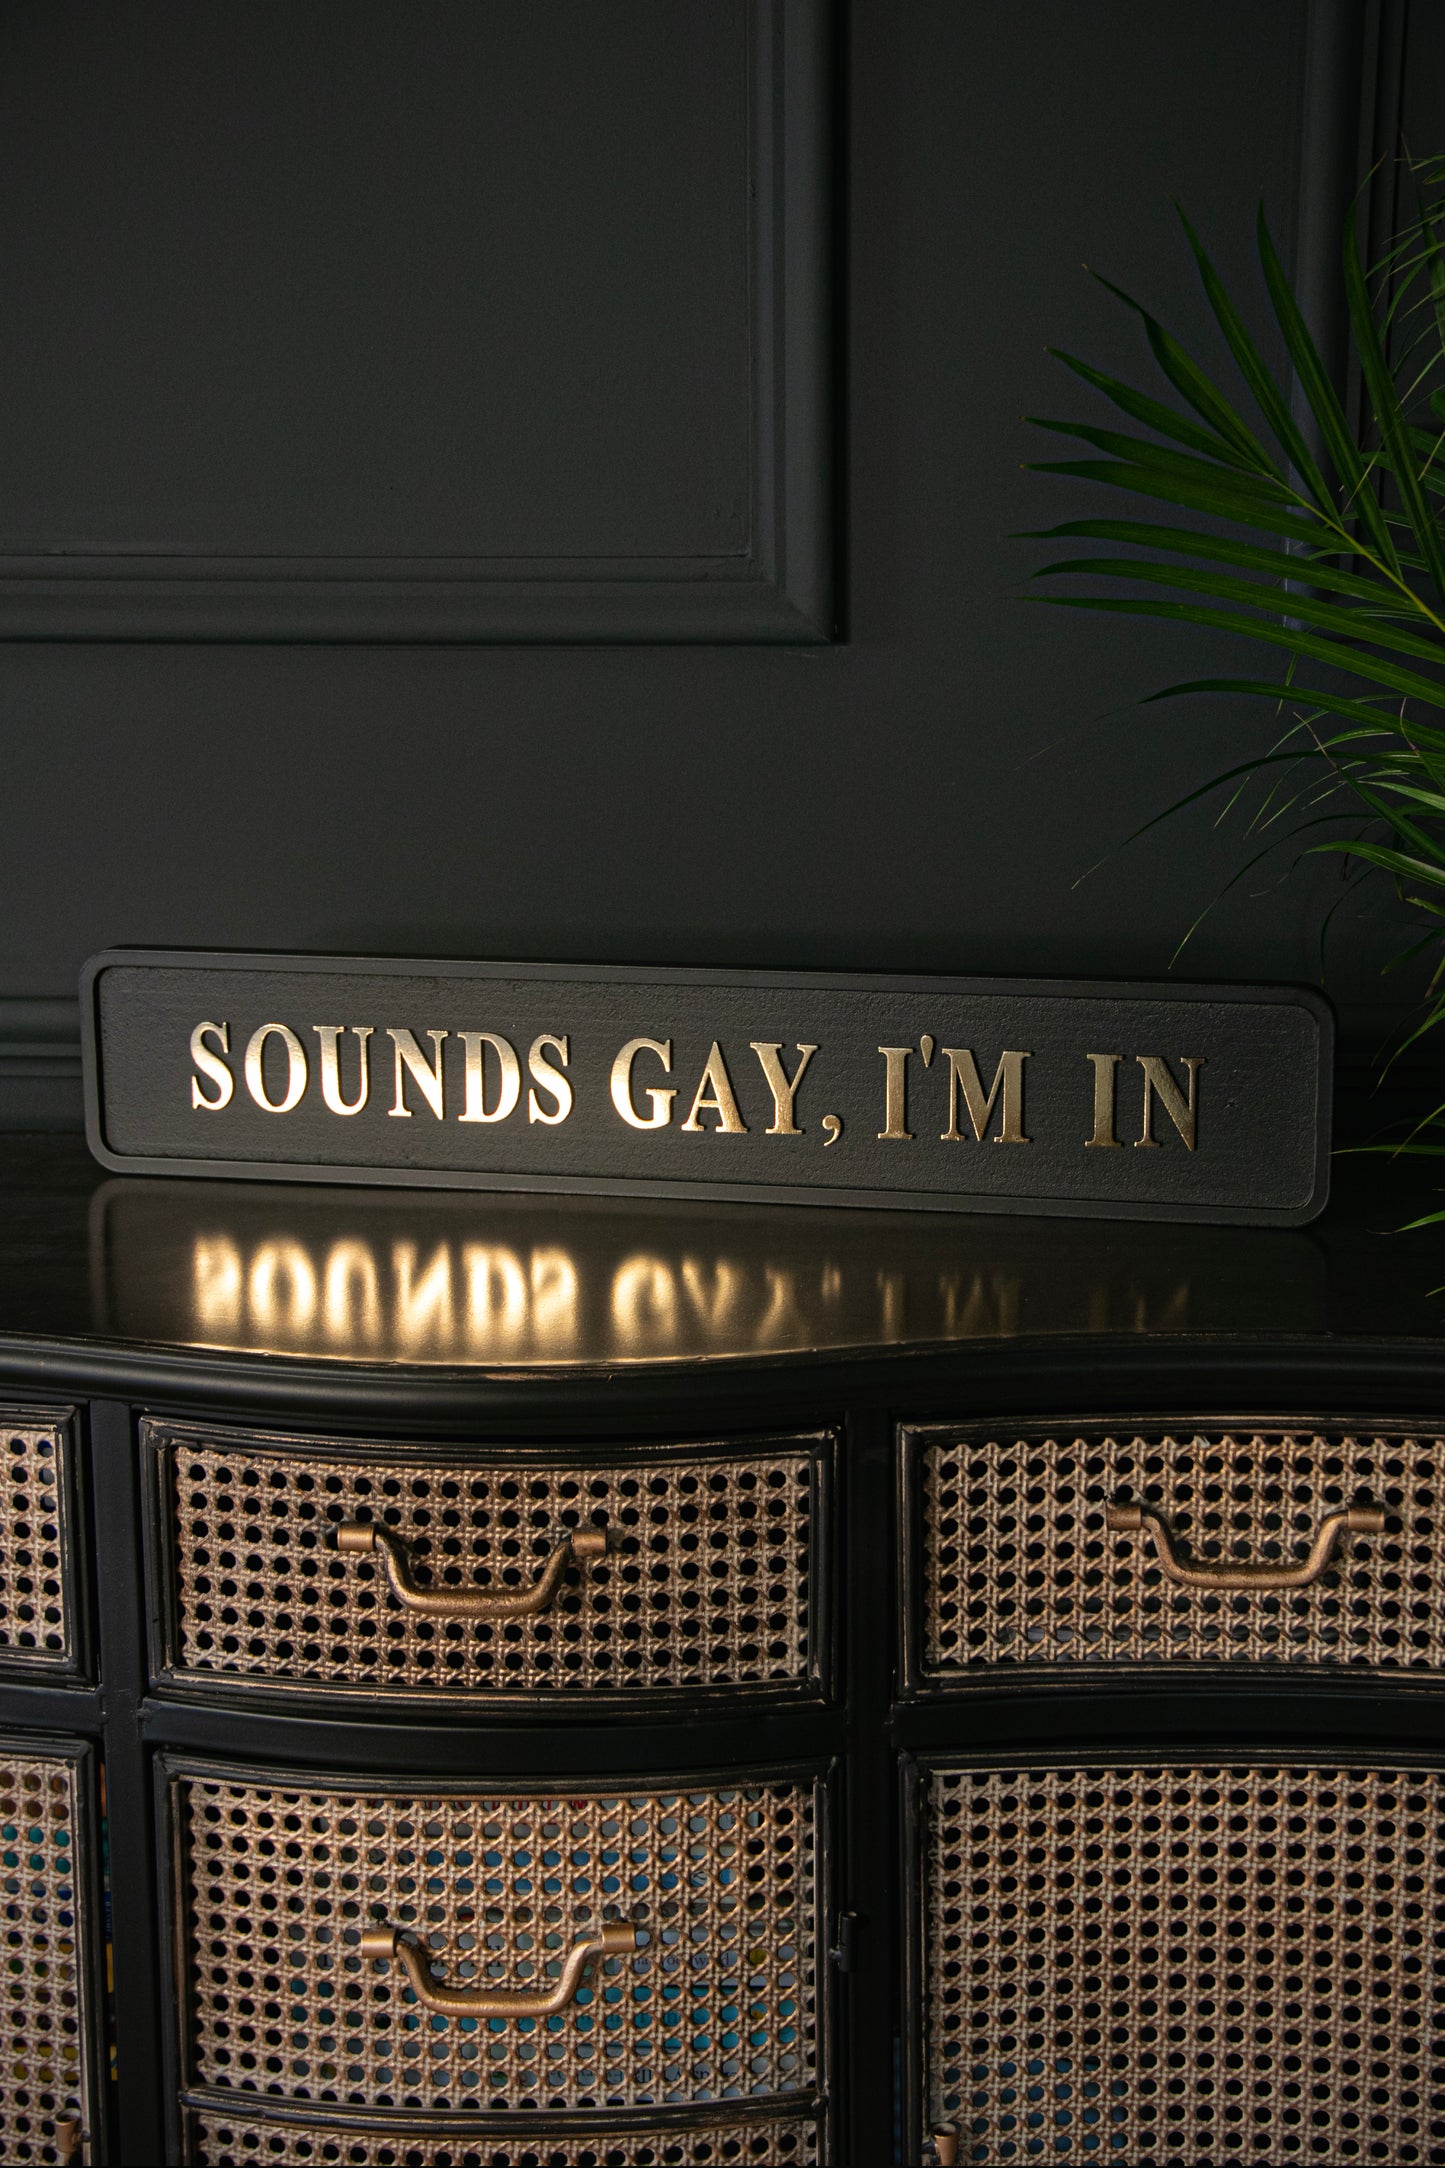 Sounds Gay, I'm In Sign